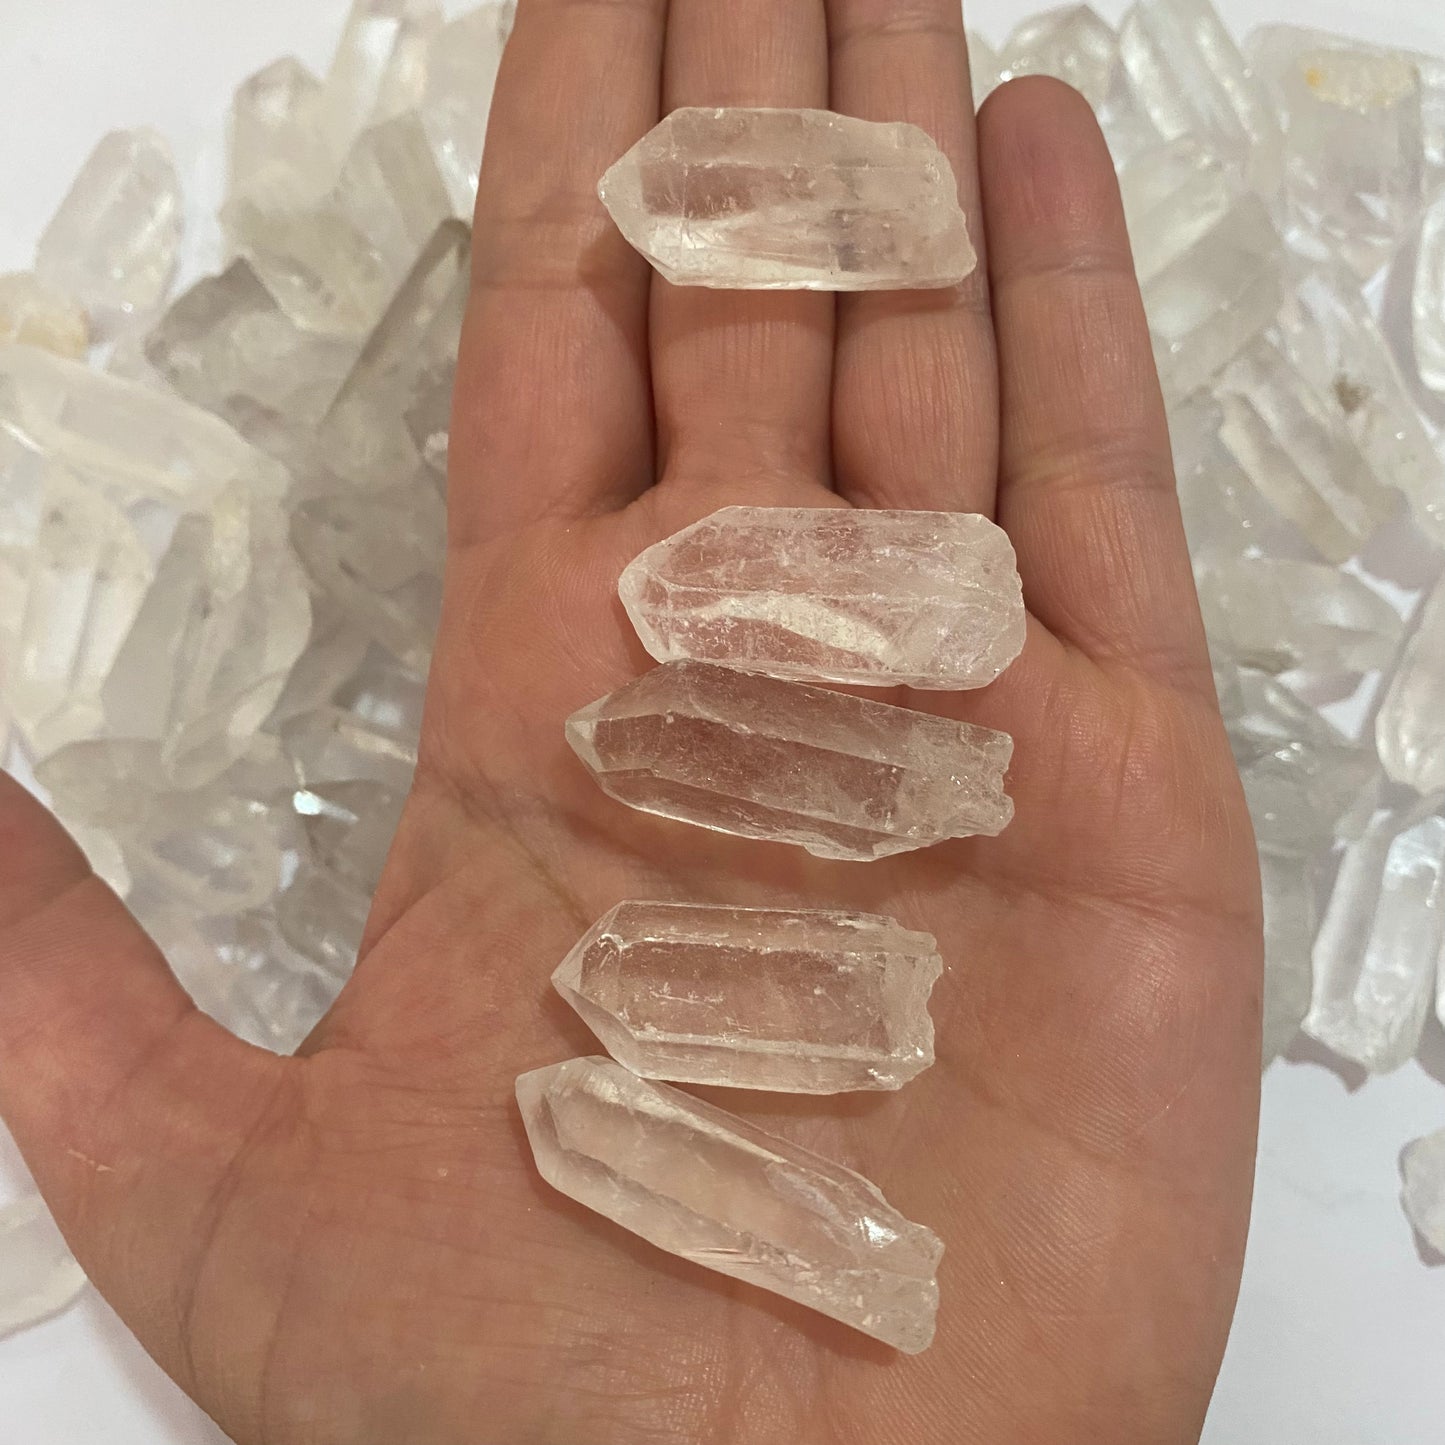 Clear Quartz Natural Pointers - Crystal Geological